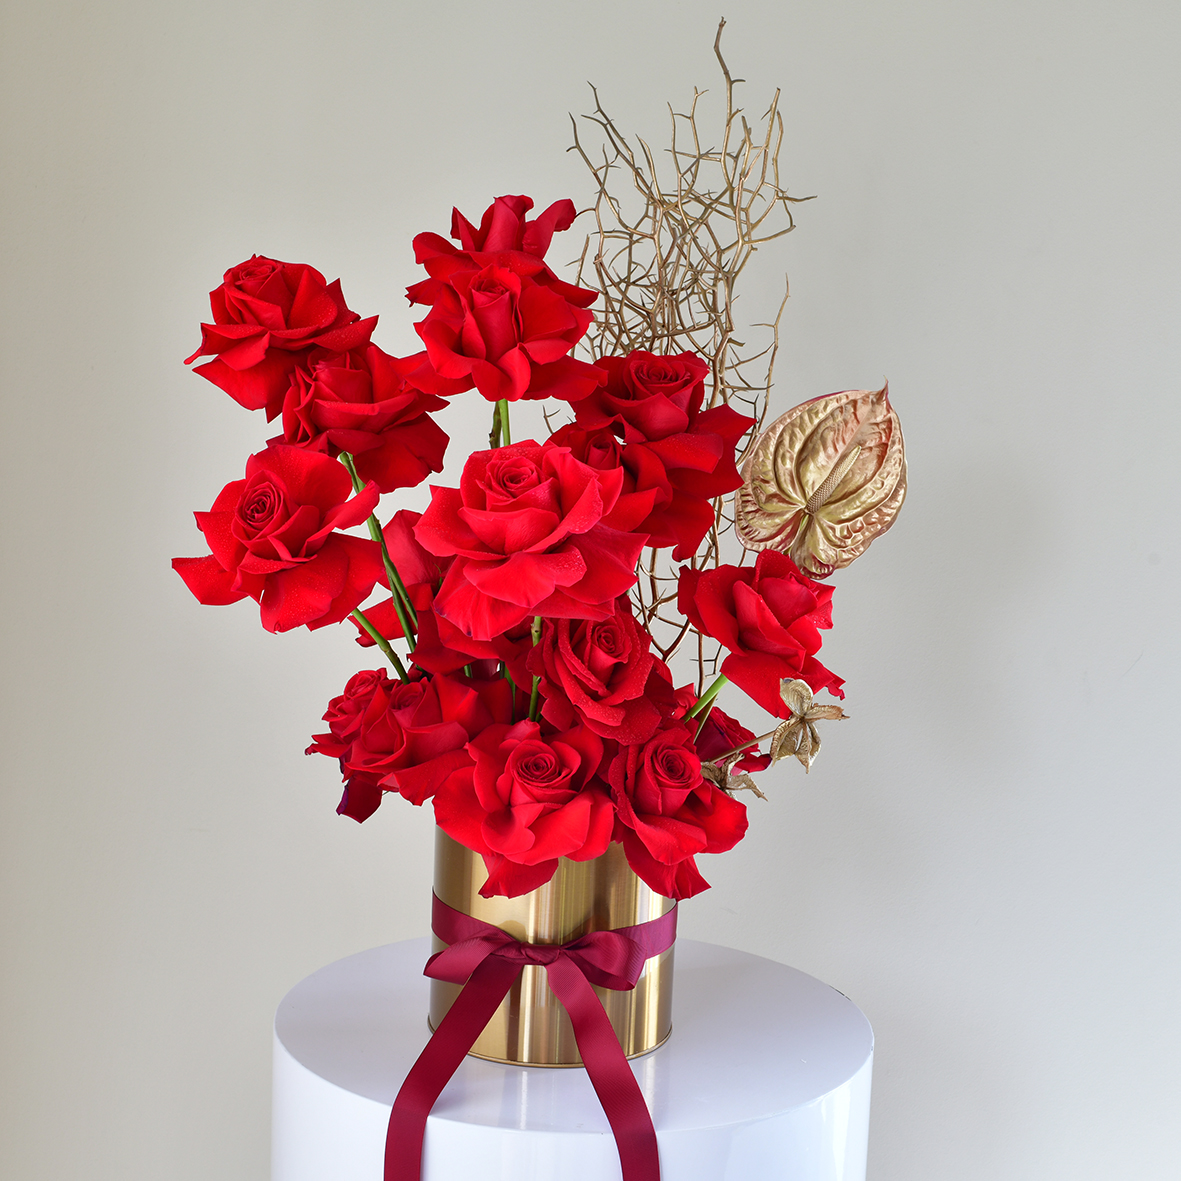 Red Roses in a Vase Delivery Sydney- Valentine's Day Special